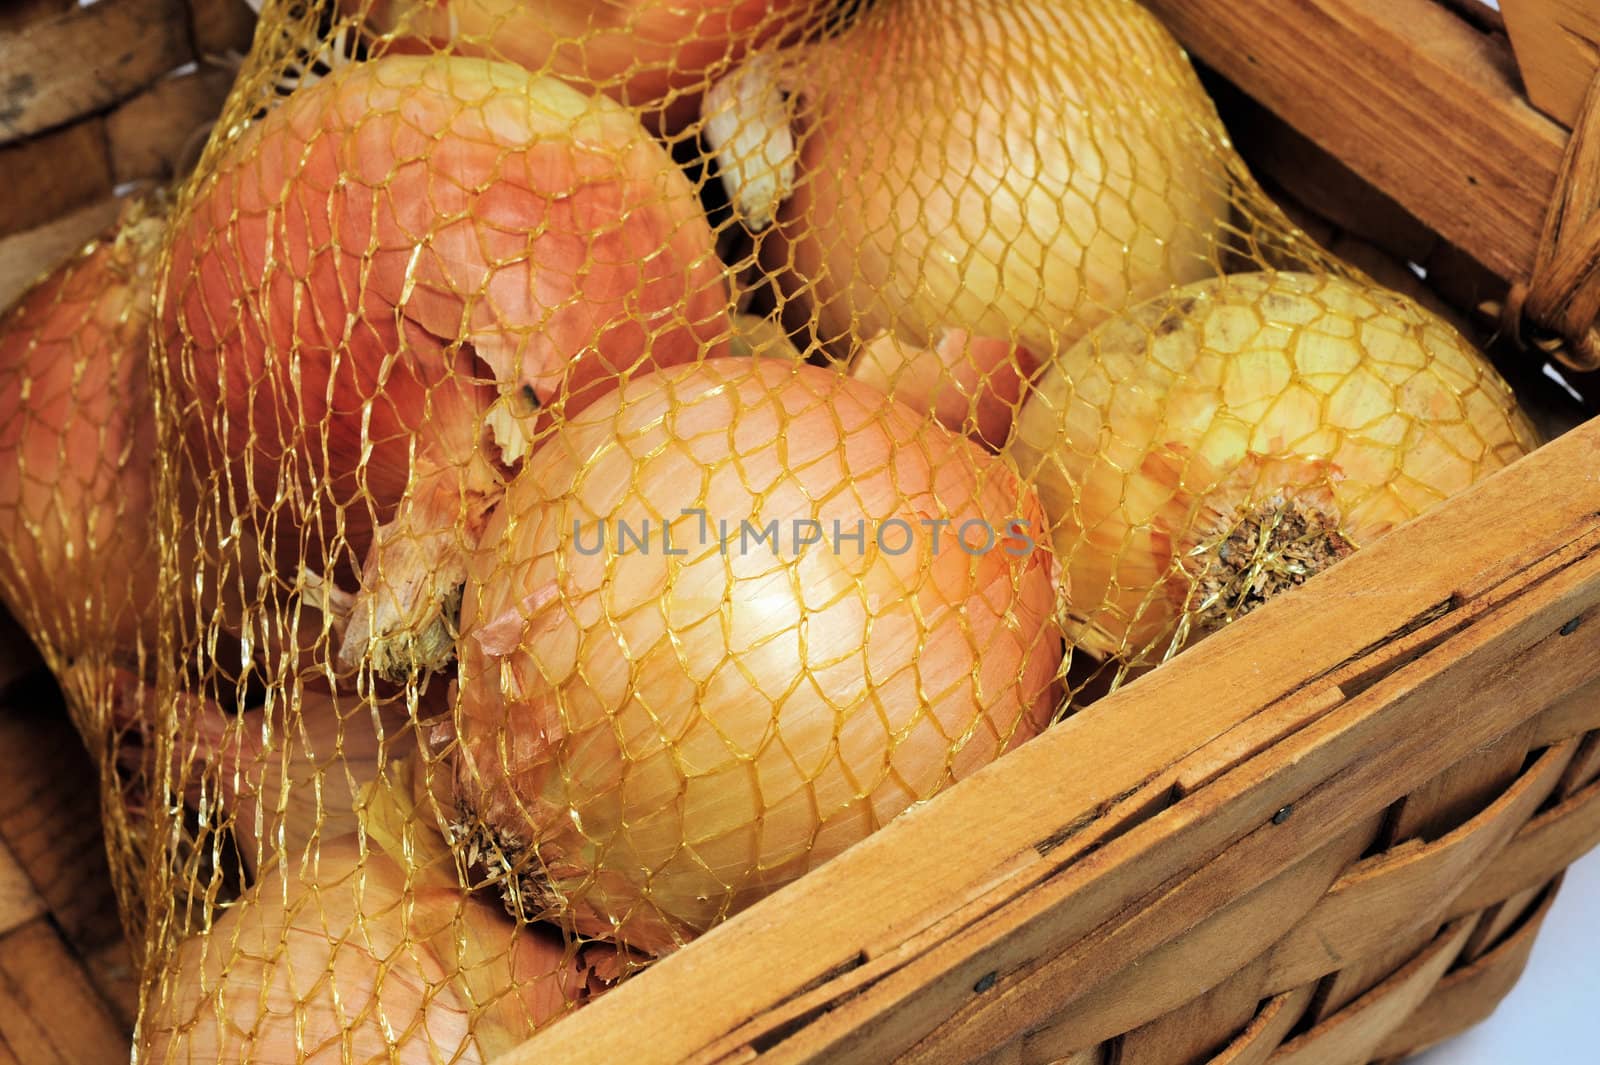 Onions in a mesh bag and wooden basket.